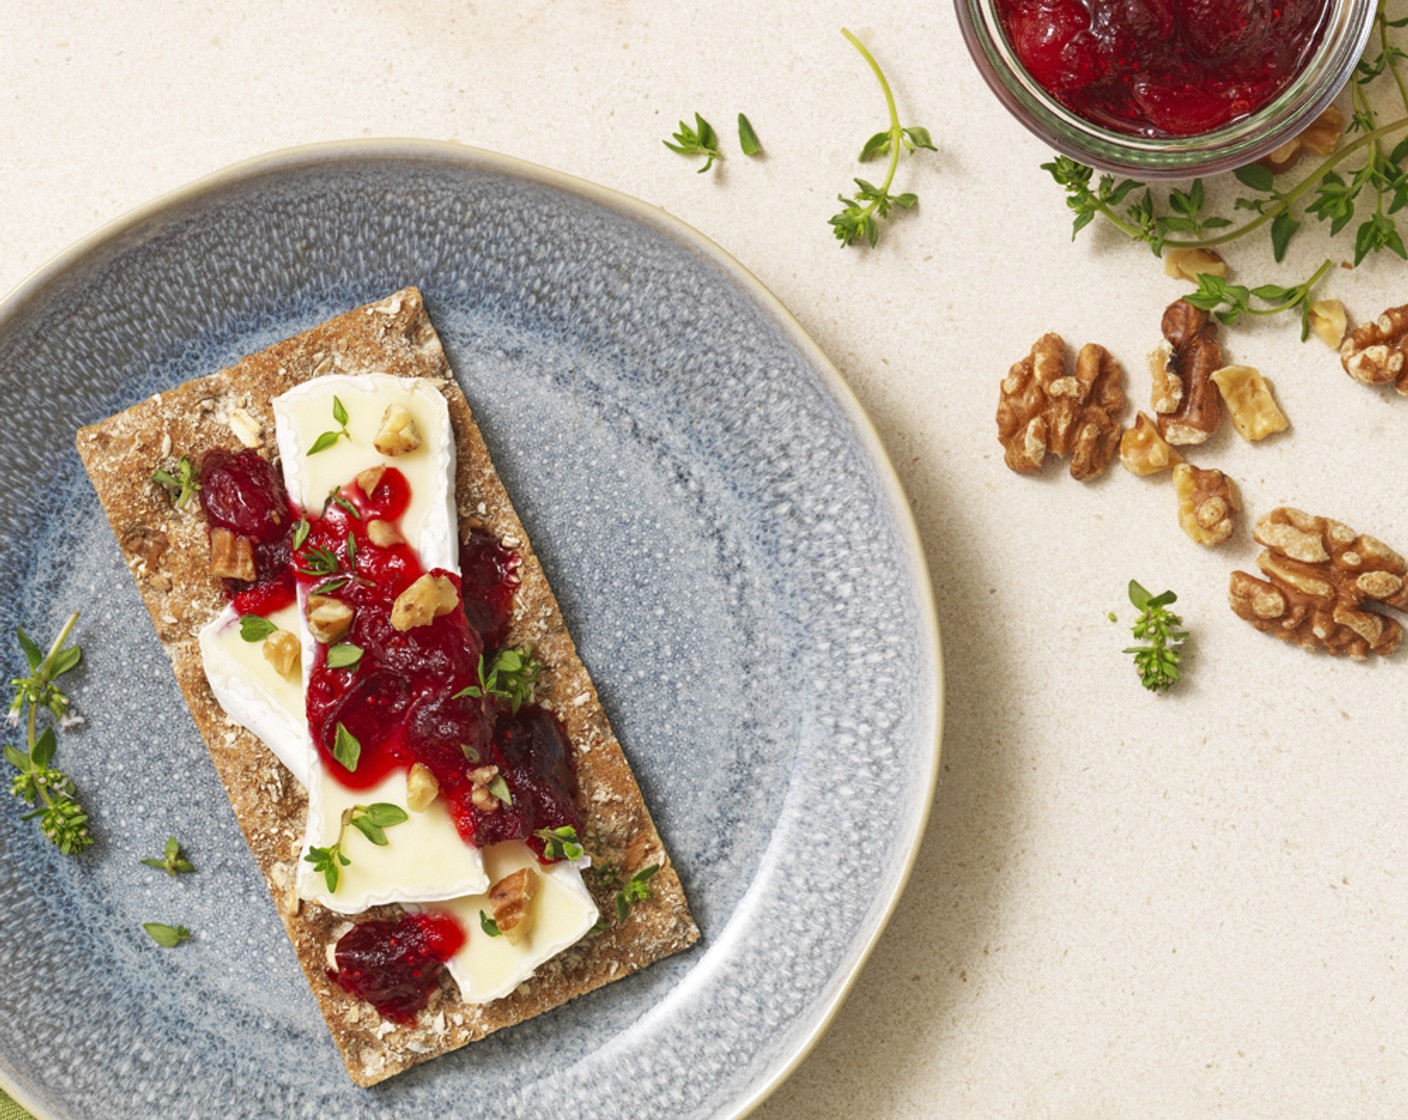 step 2 Top each Crispbread (4 slices) with Brie Cheese (2 oz), Cranberry Relish (1/4 cup), chopped walnuts, and a sprinkle of Fresh Thyme Leaves (1 tsp). Enjoy!